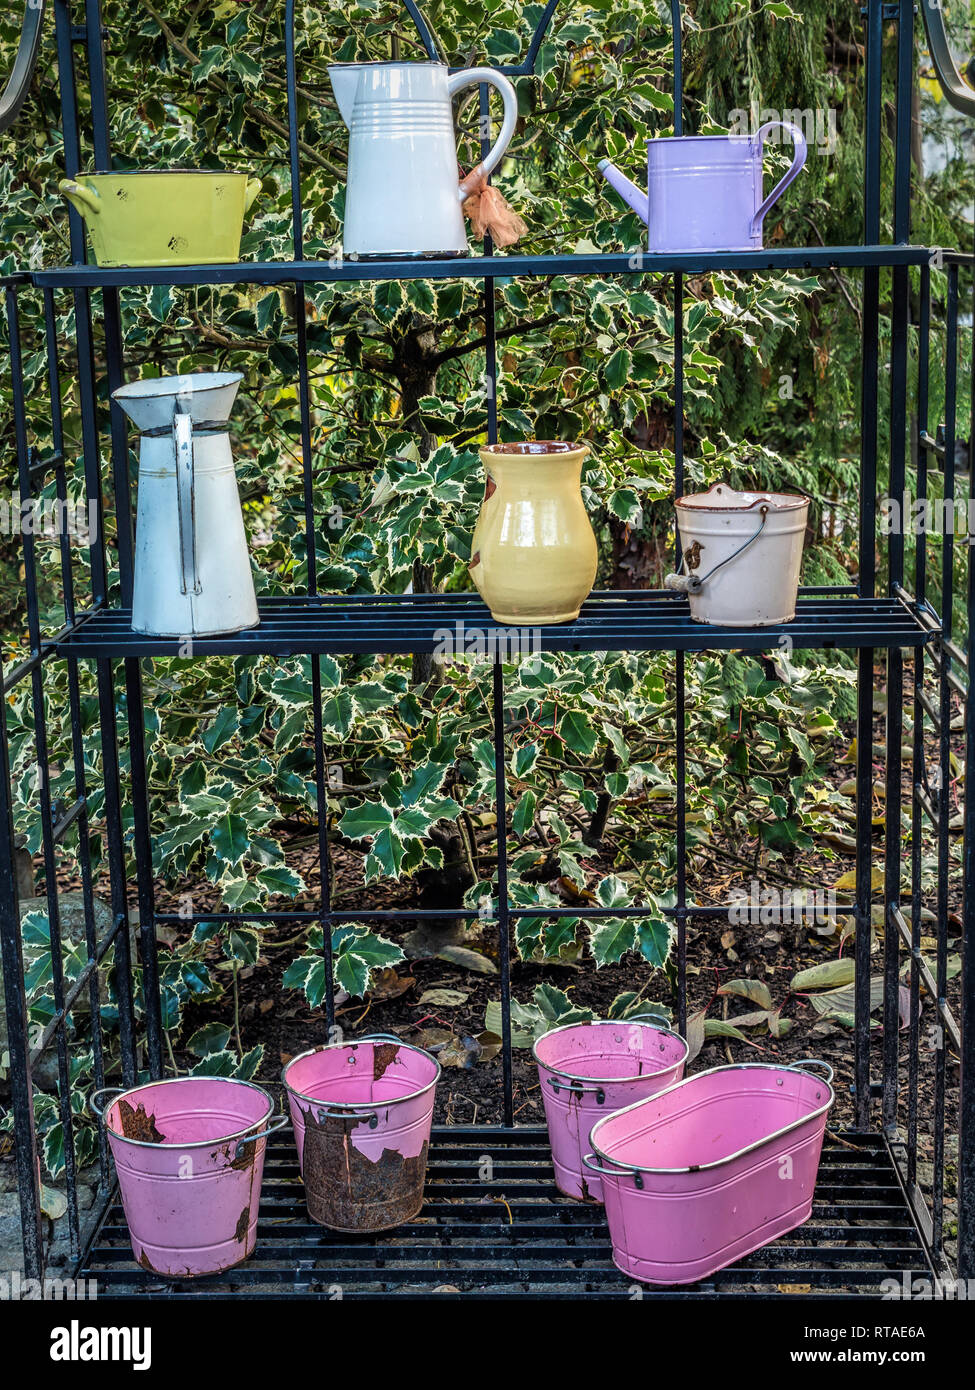 Old watering cans and other garden utensils and vessels placed outside on metal rack as decorations in the garden Stock Photo